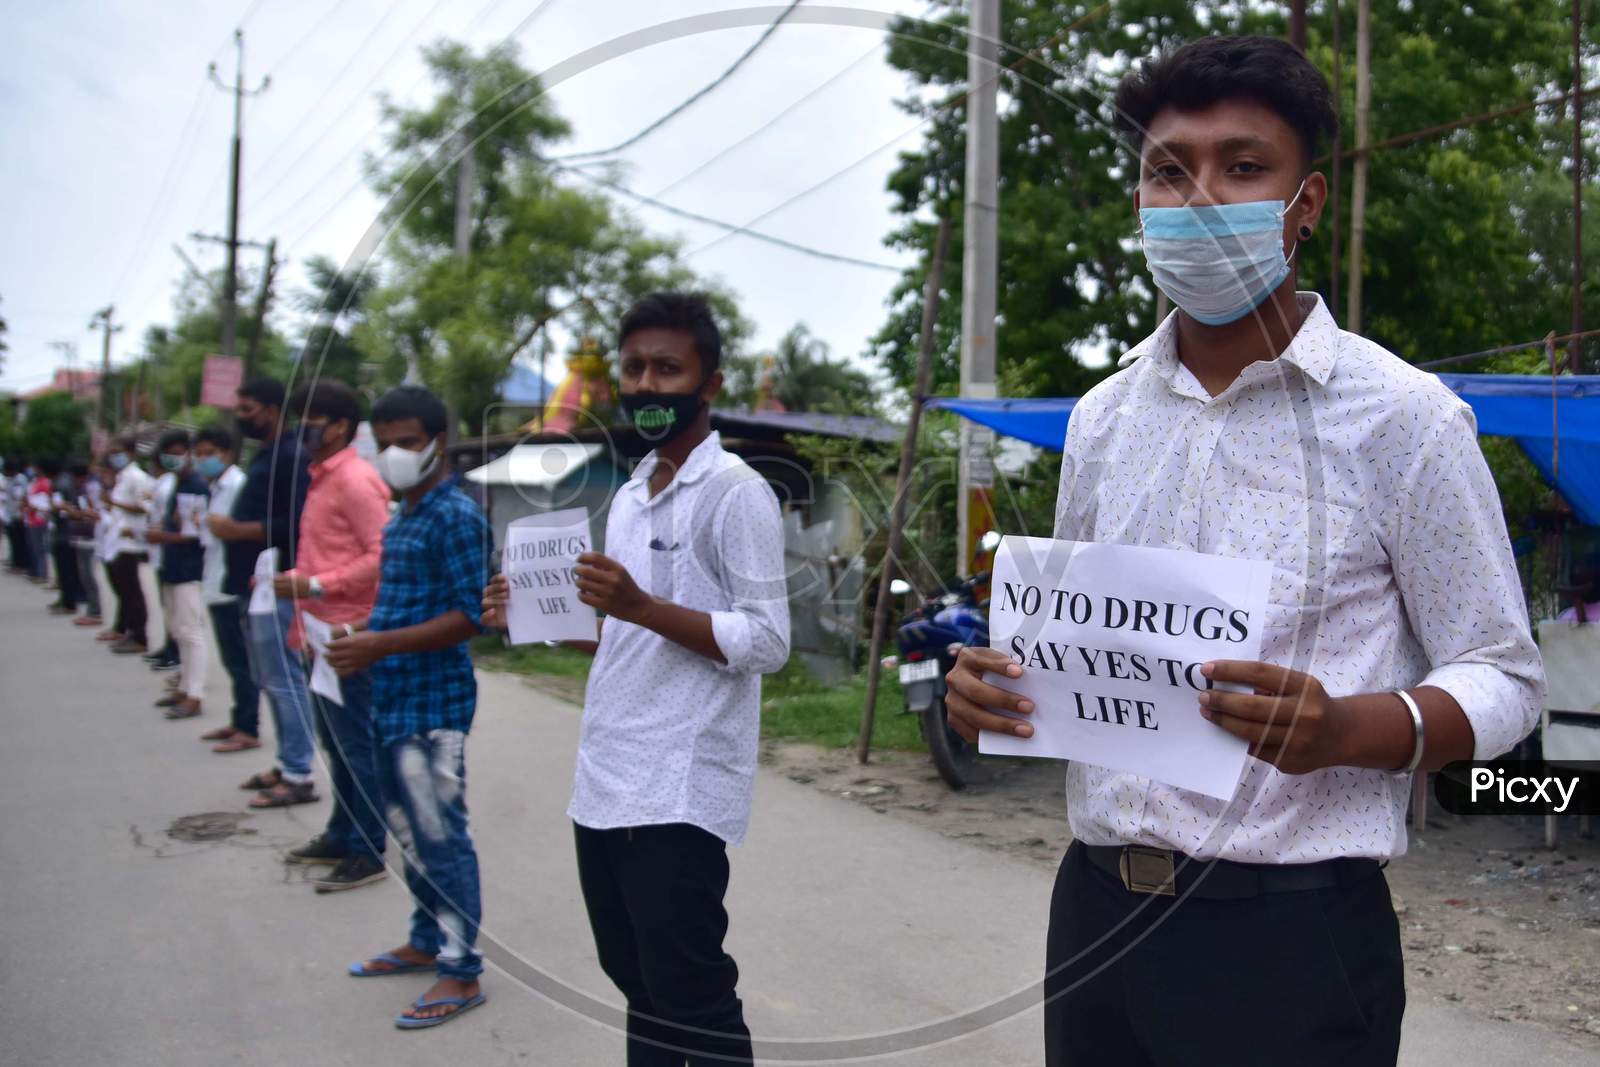 Members of All Assam Students Union(AASU) form a human chain to protest against drug abuse in Nagaon, Assam on July 10, 2020